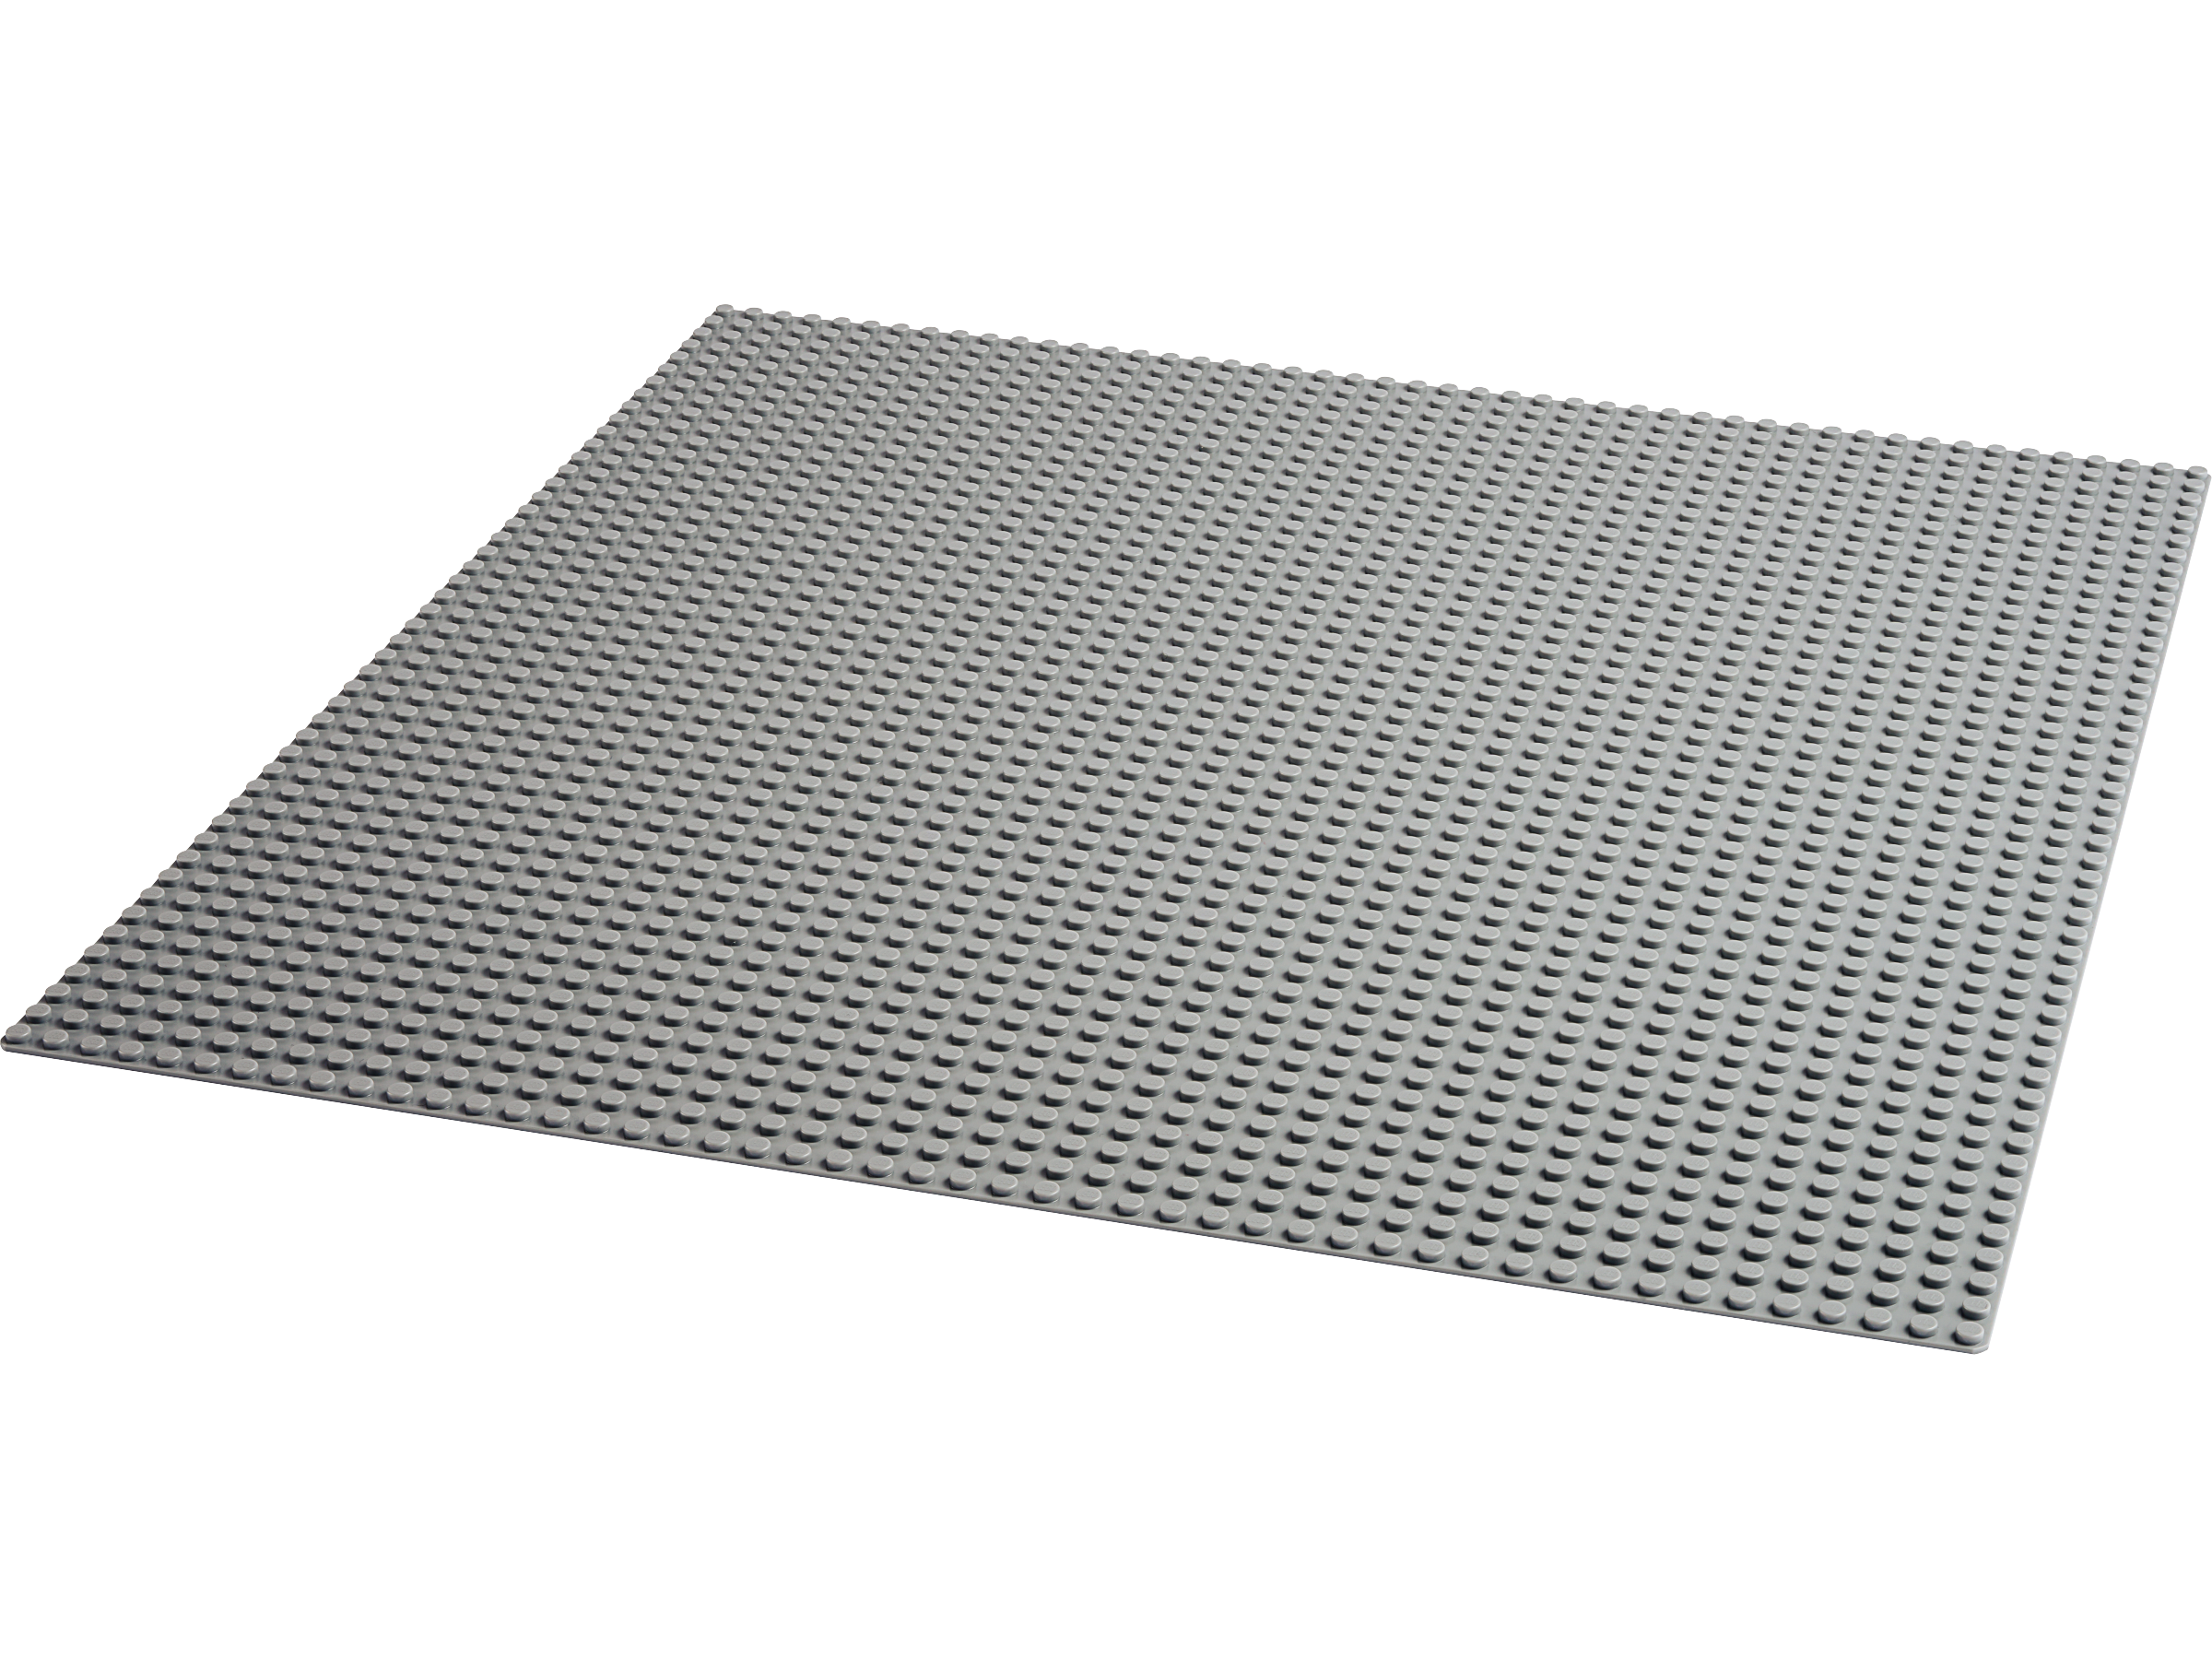 Vintage LEGO BASEPLATE 50x50 Studs Gray 15 Large Square Building